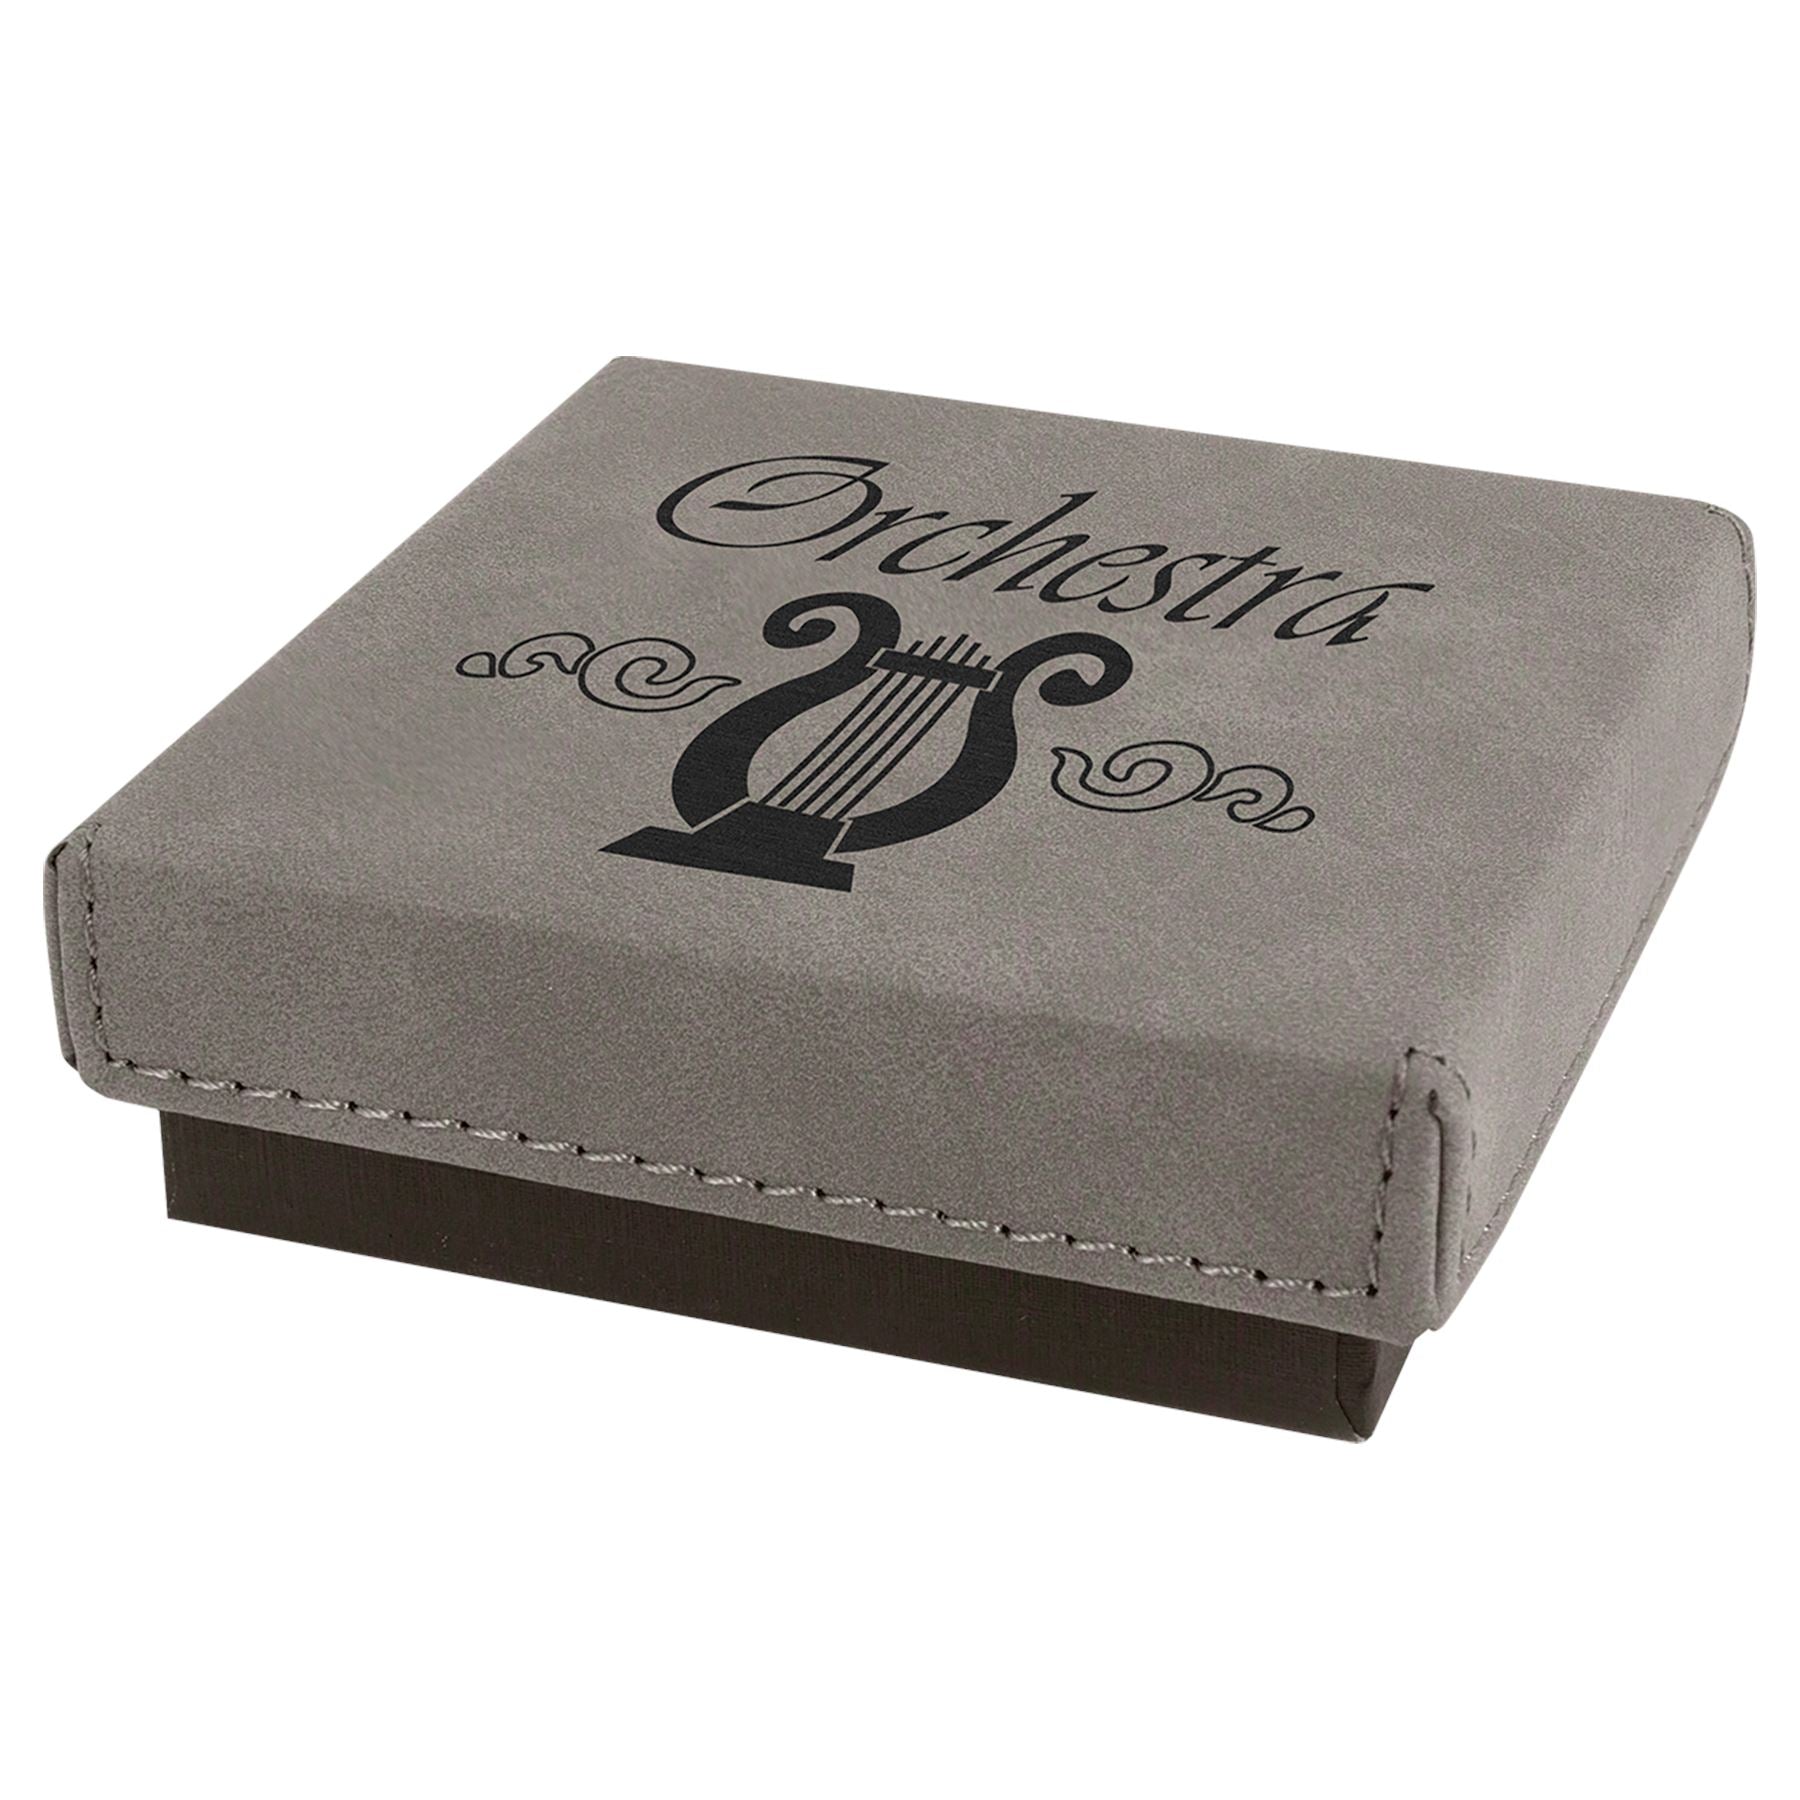 Medal / Gift Box, 3 1/2" x 3 1/2" with Laserable Leatherette Lid, Laser Engraved Gift Box Craftworks NW Gray/Black Small 